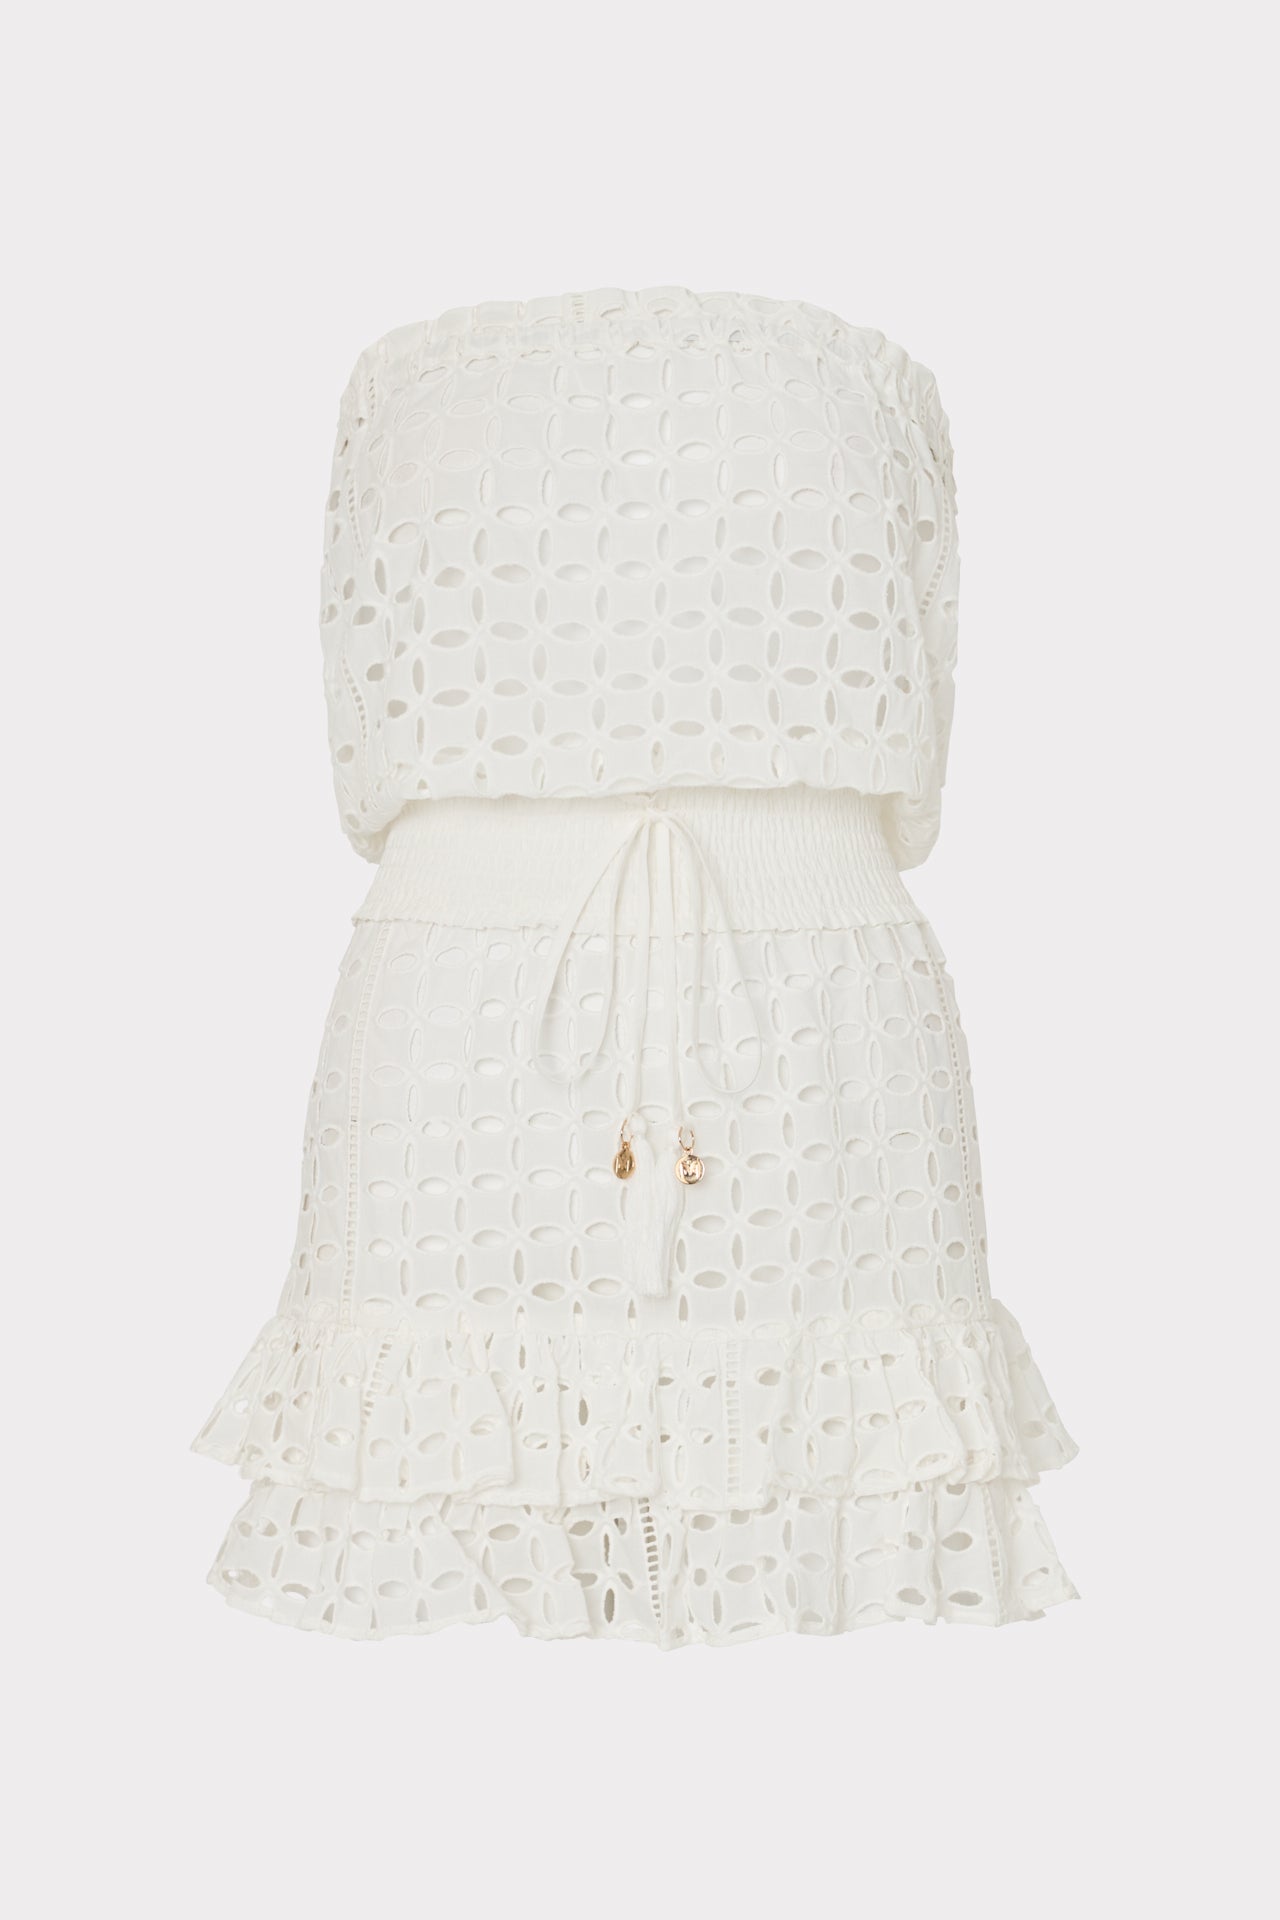 Verity Cotton Eyelet Dress in White | MILLY